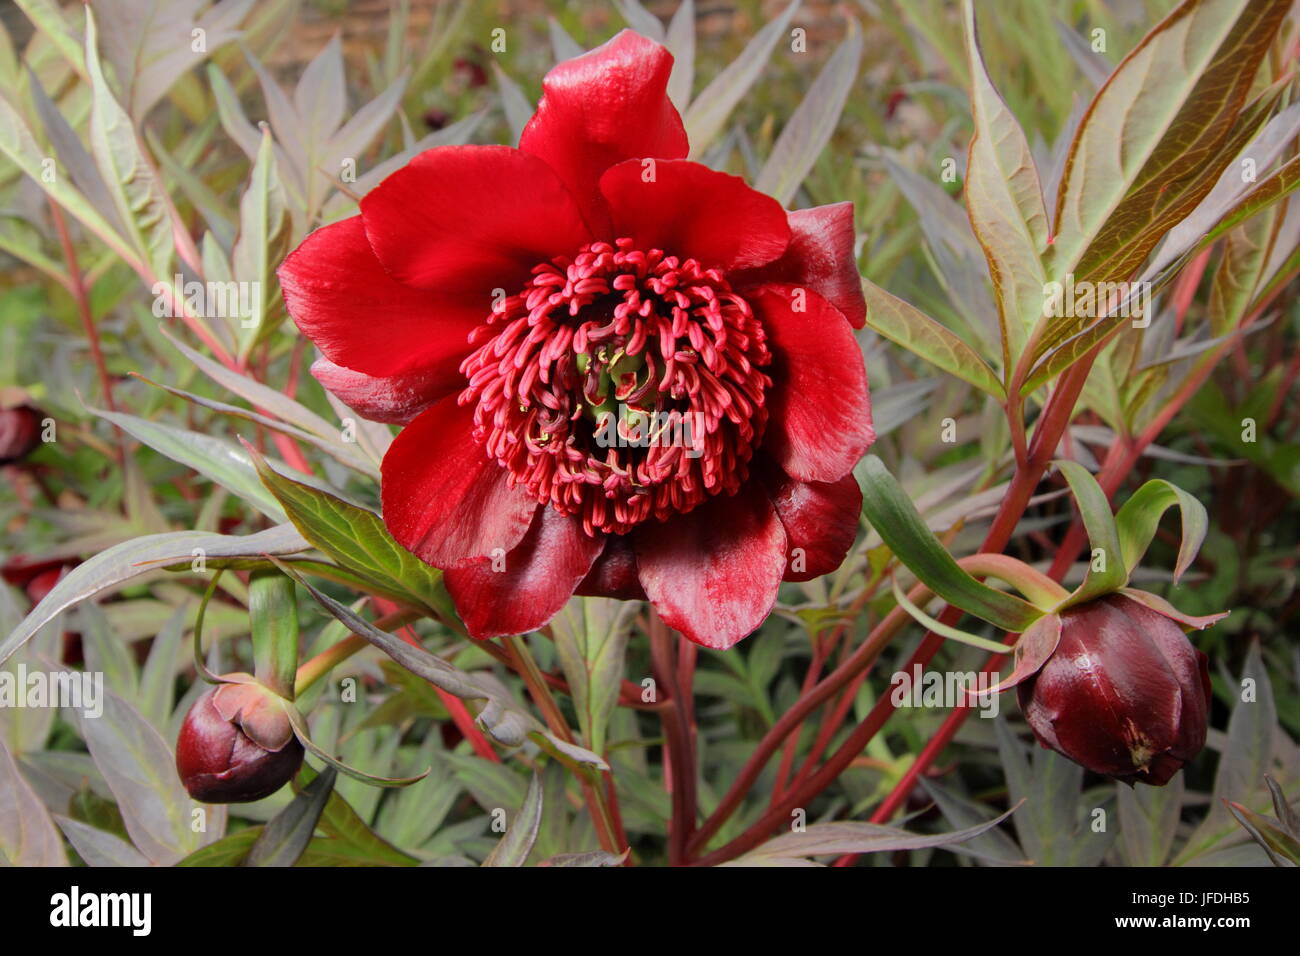 Tree peony (paeonia delavayi), flowering in an English garden in early summer, Yorkshire, England UK Stock Photo